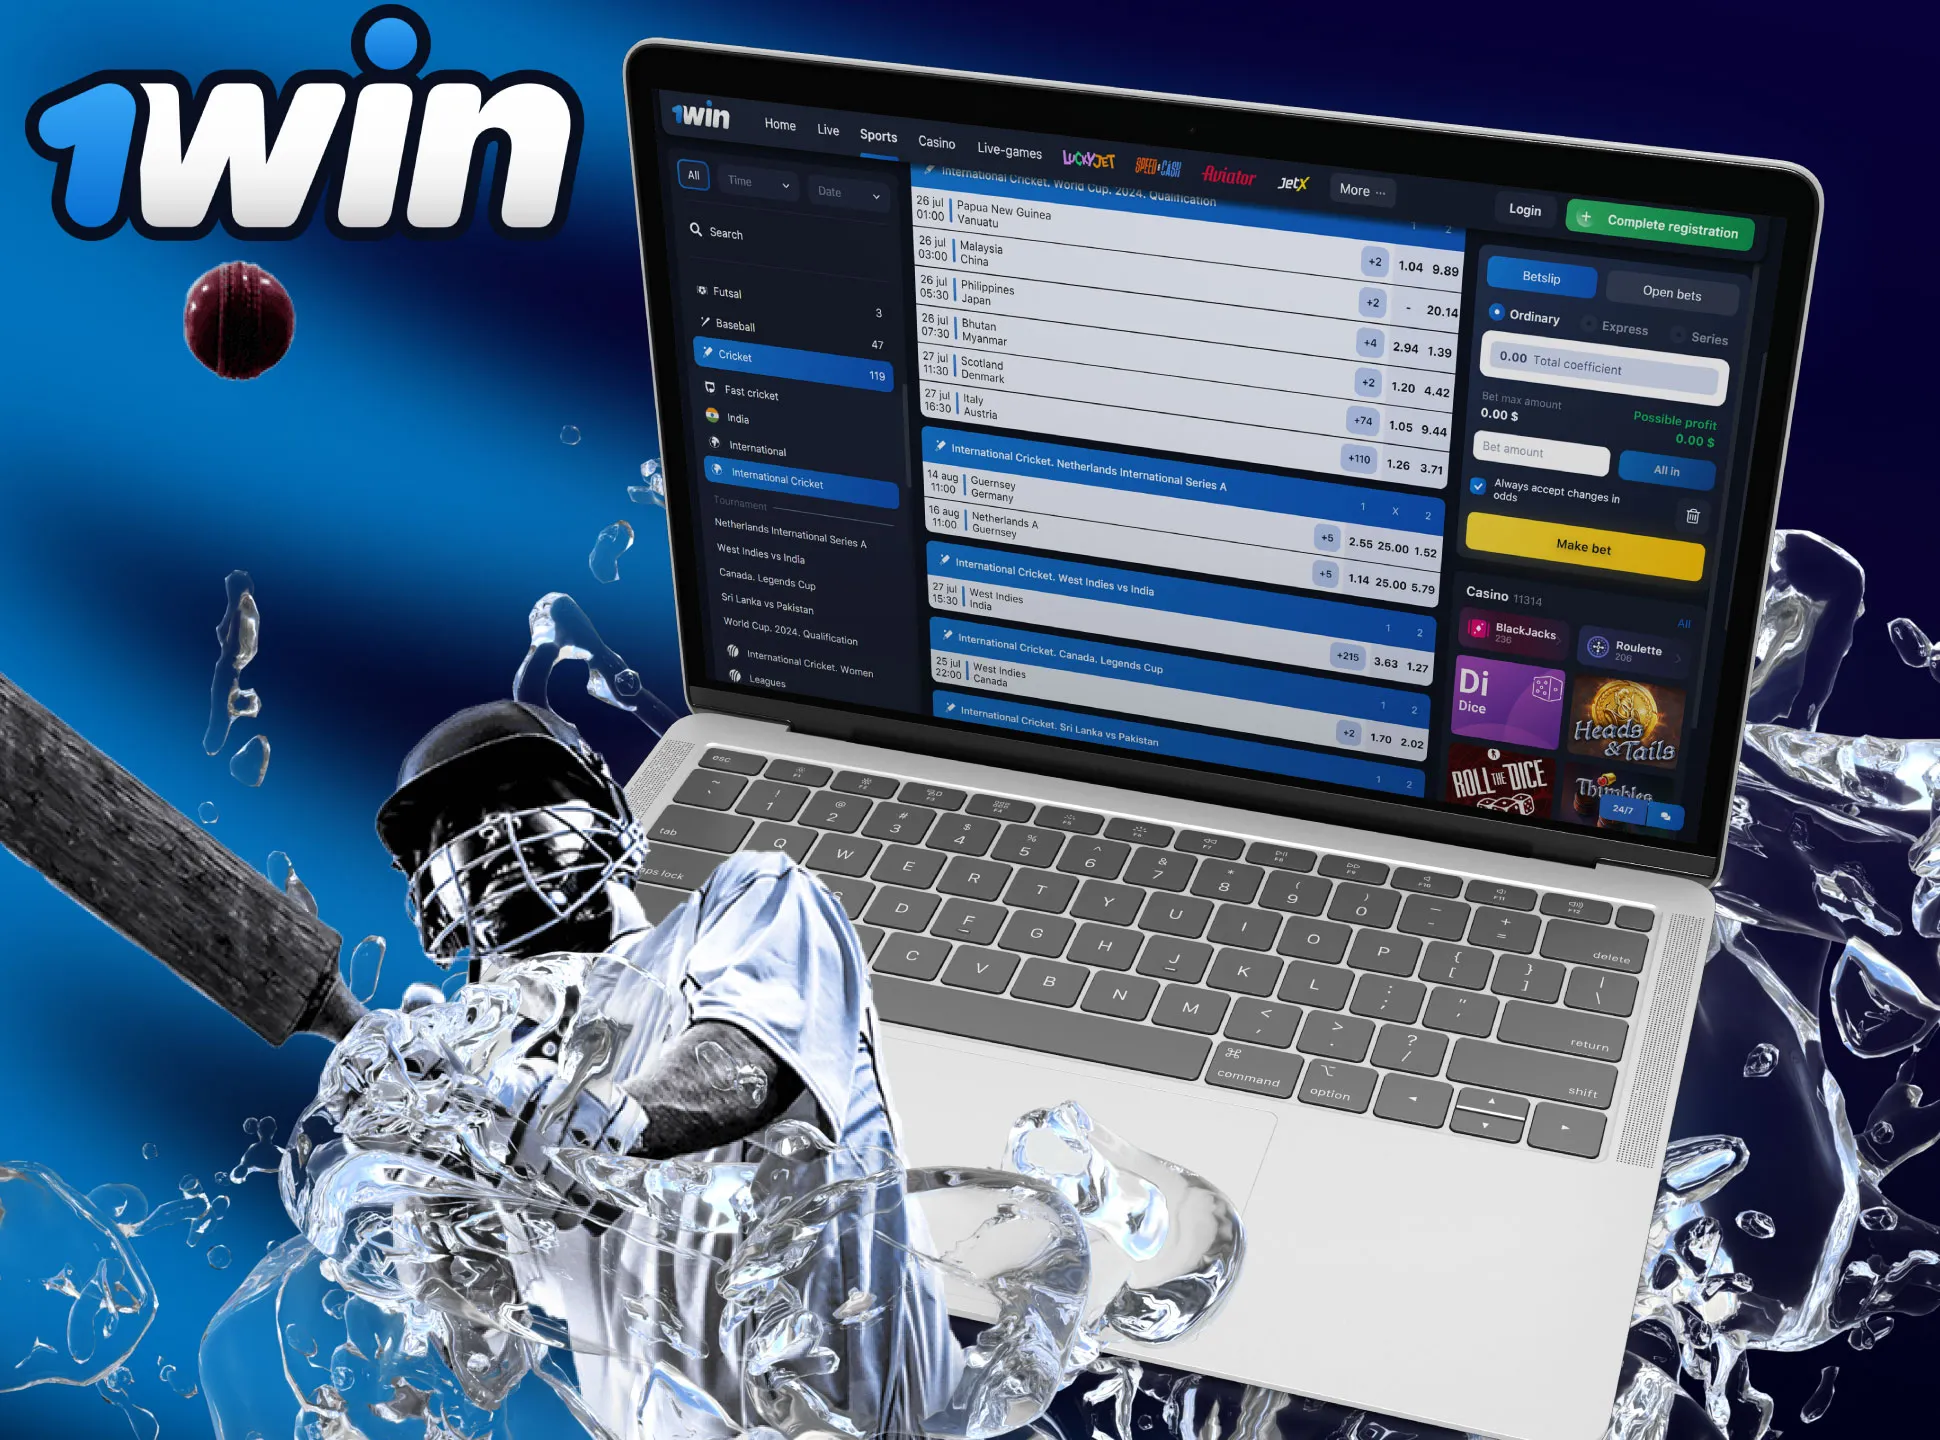 To start betting on 1win you should register an account, replenish your balance, and choose a betting option.